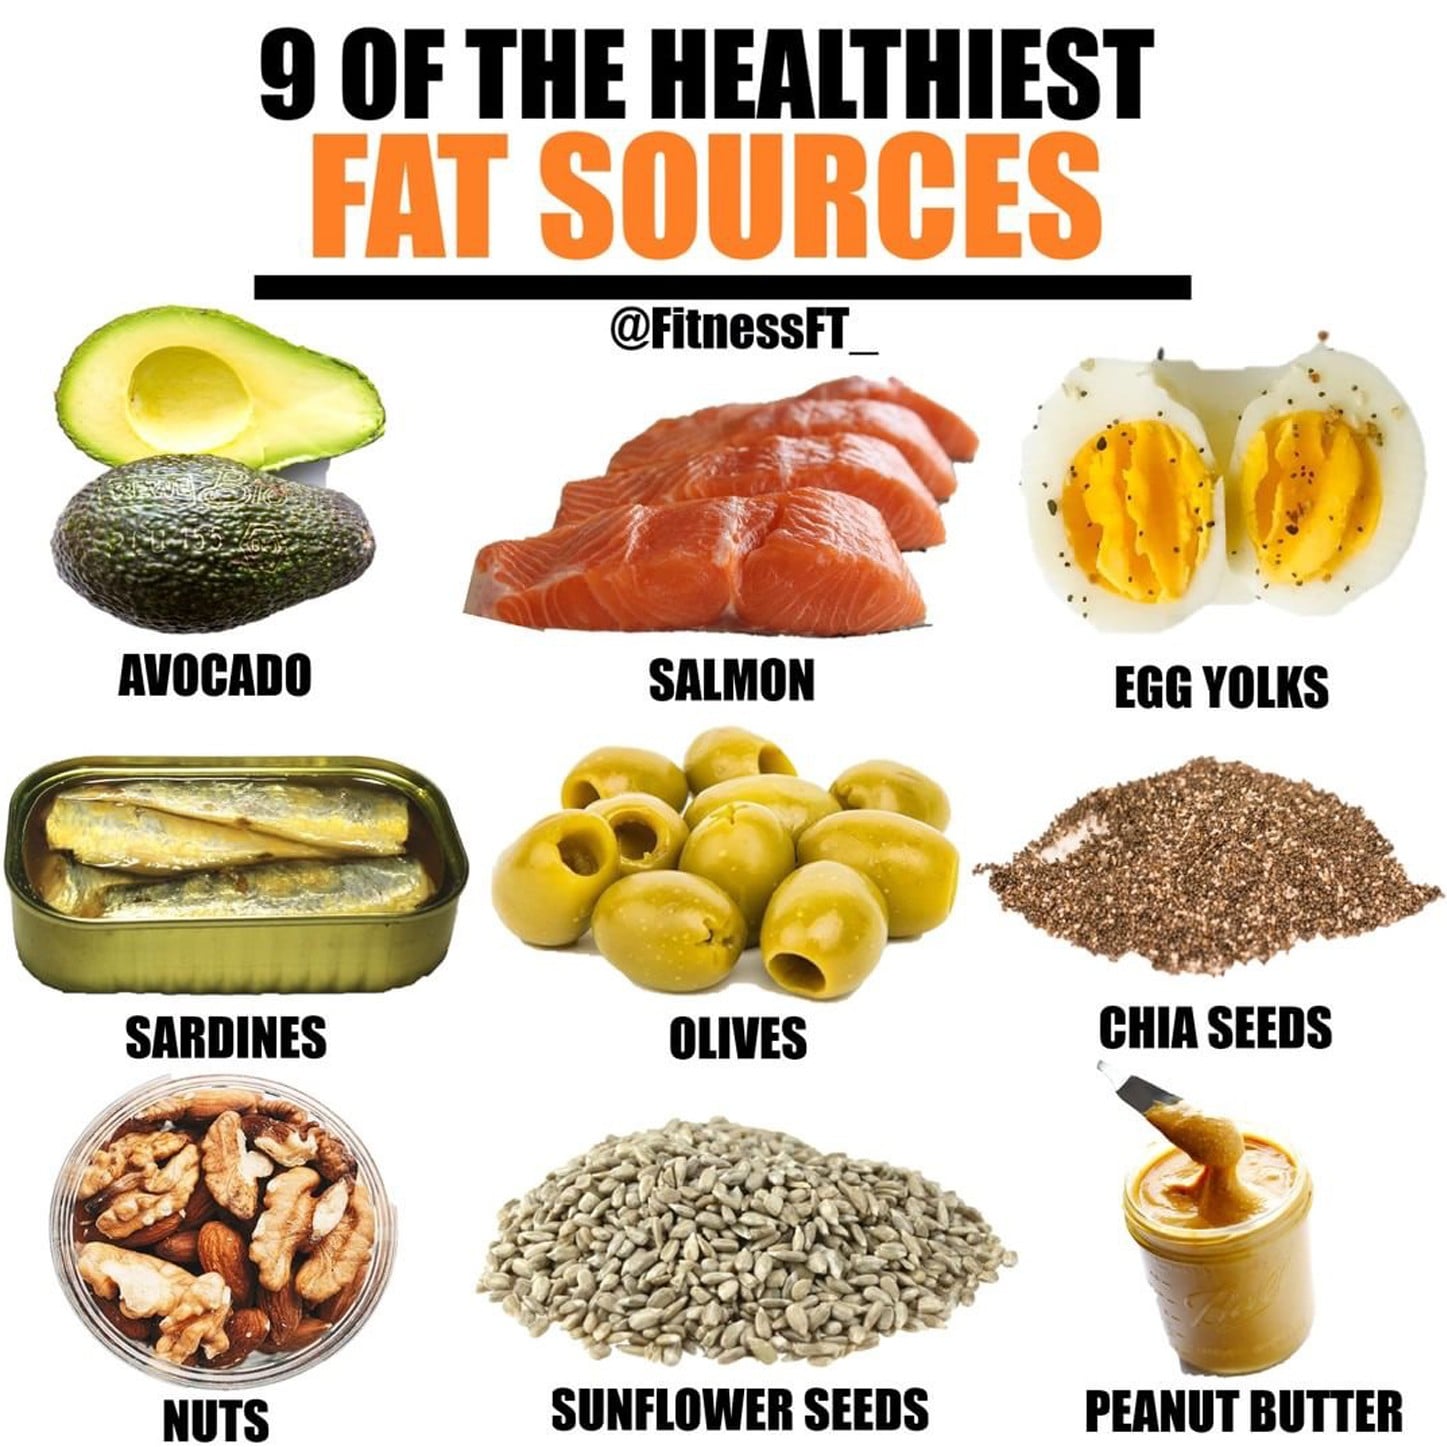 Best Sources of Healthy Fat | POPSUGAR Fitness